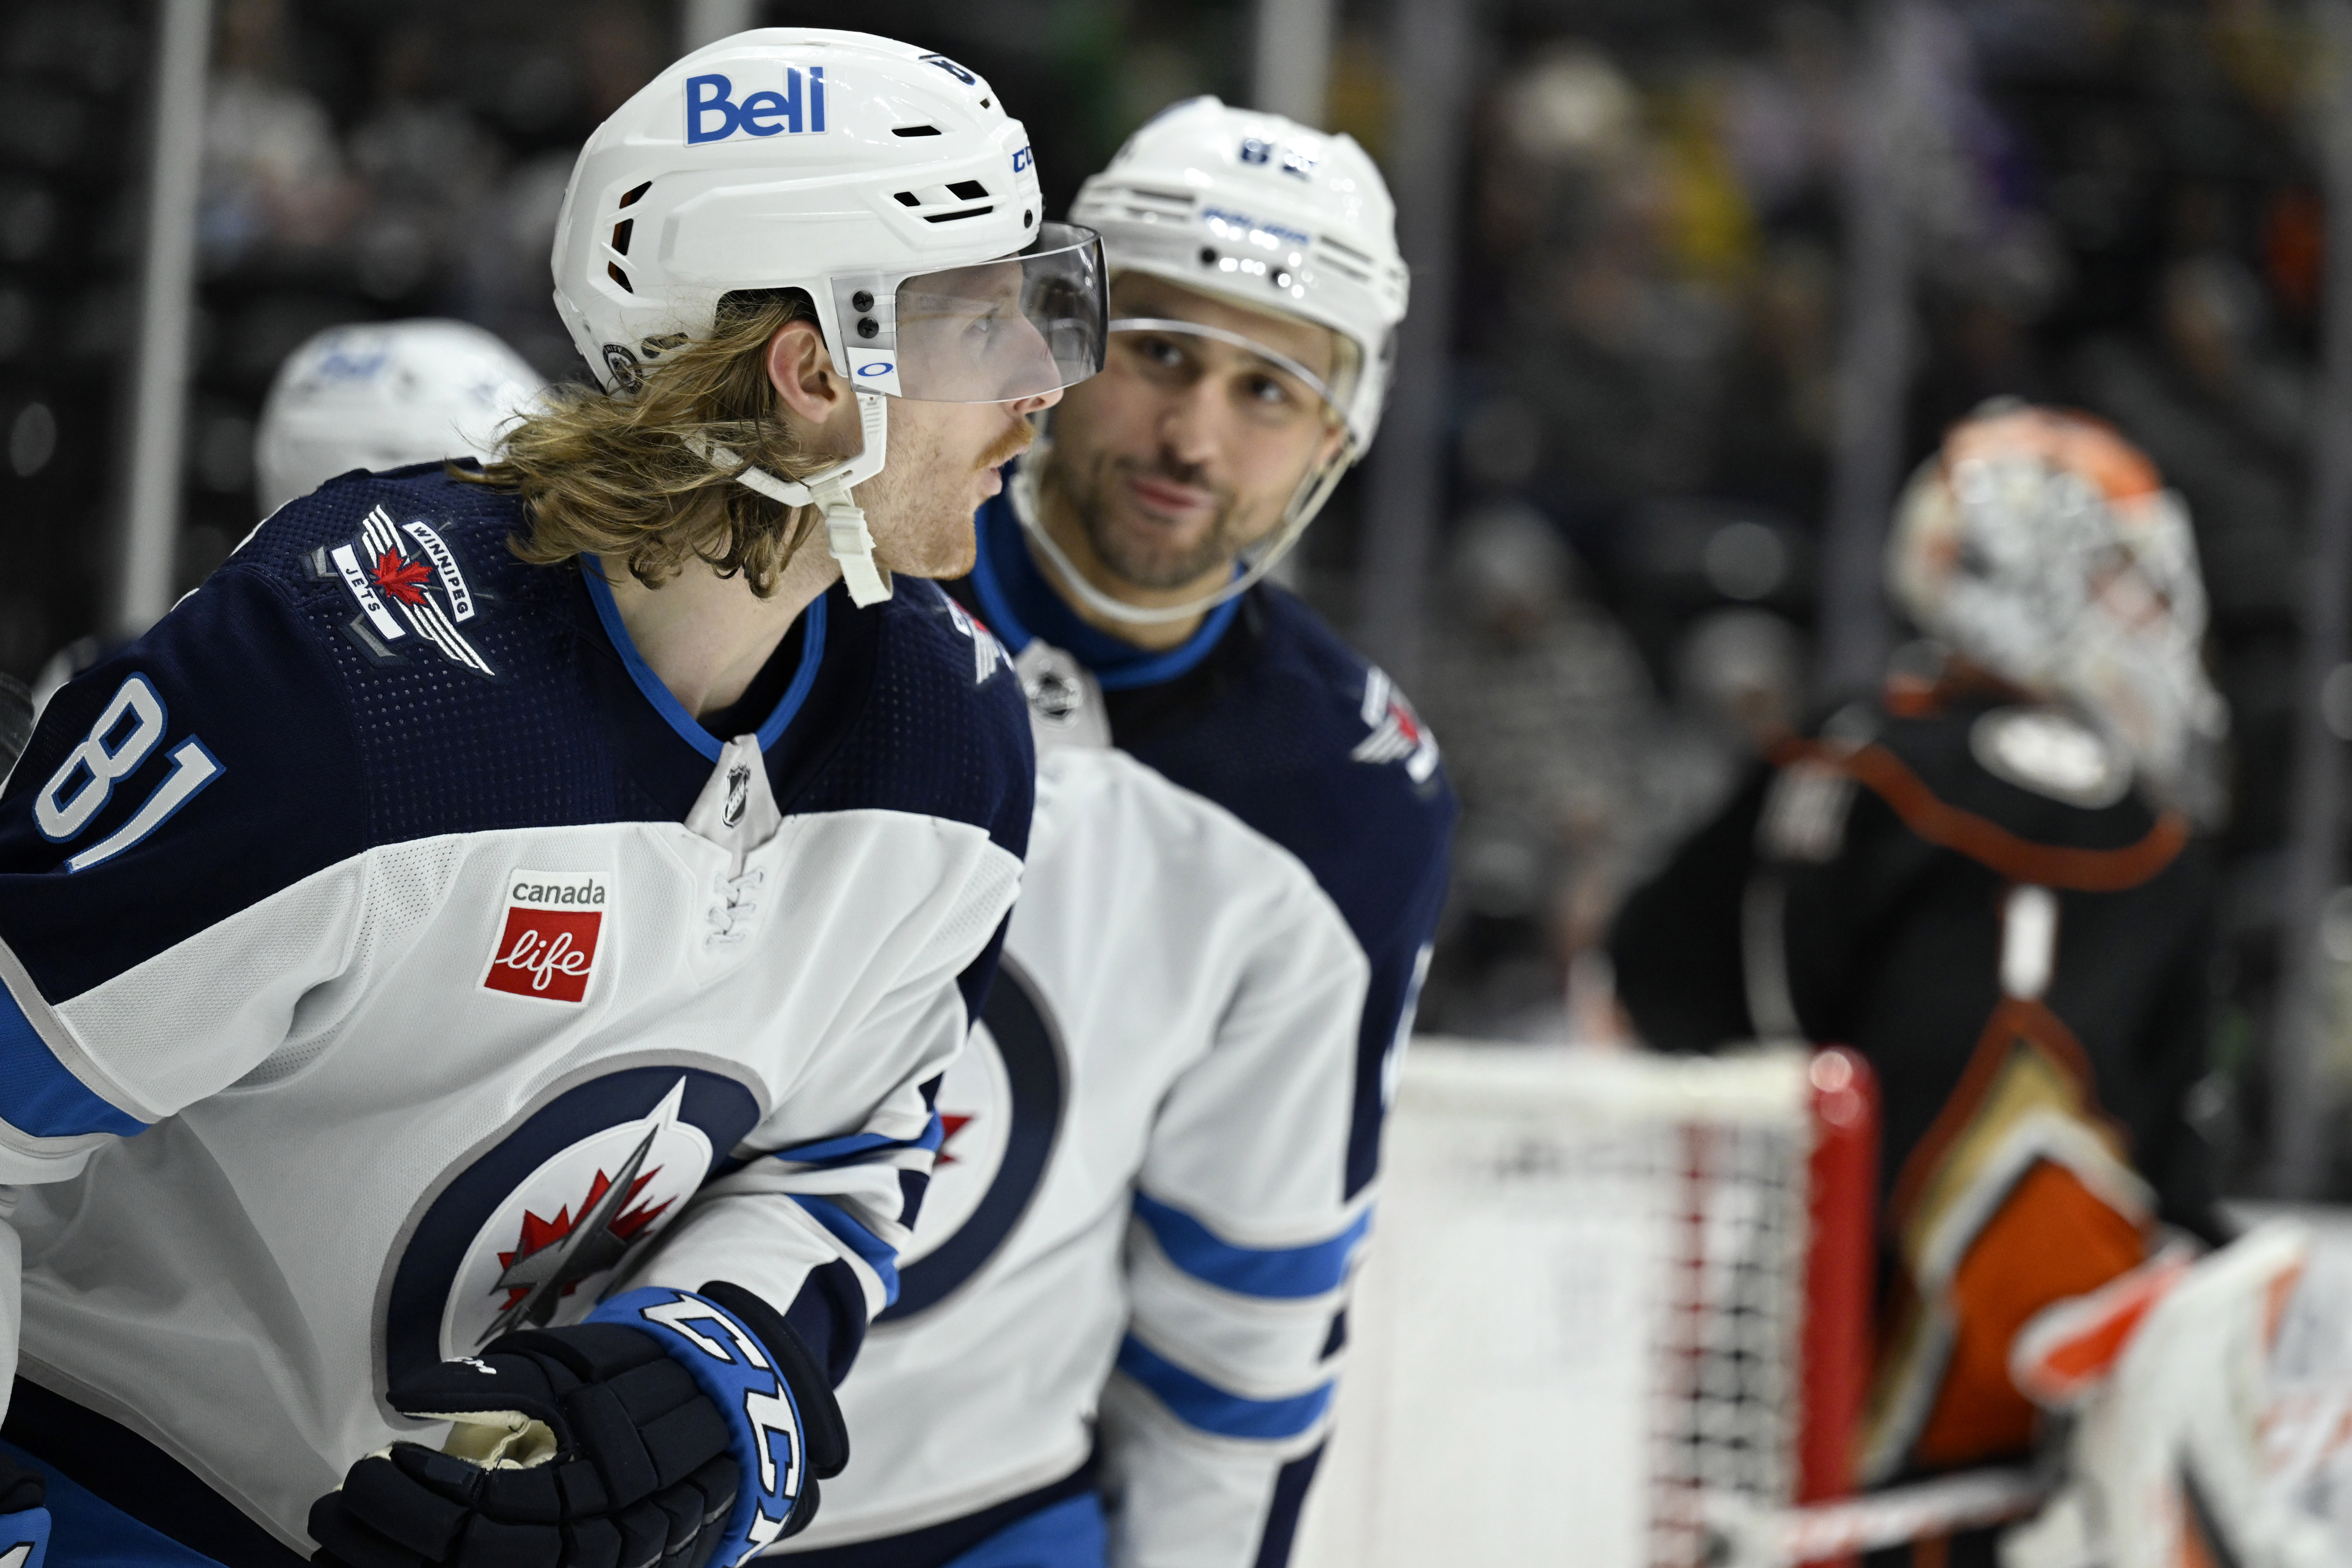 ANALYSIS: Is Winnipeg up for the challenge after injury to key Jets player Kyle Connor?